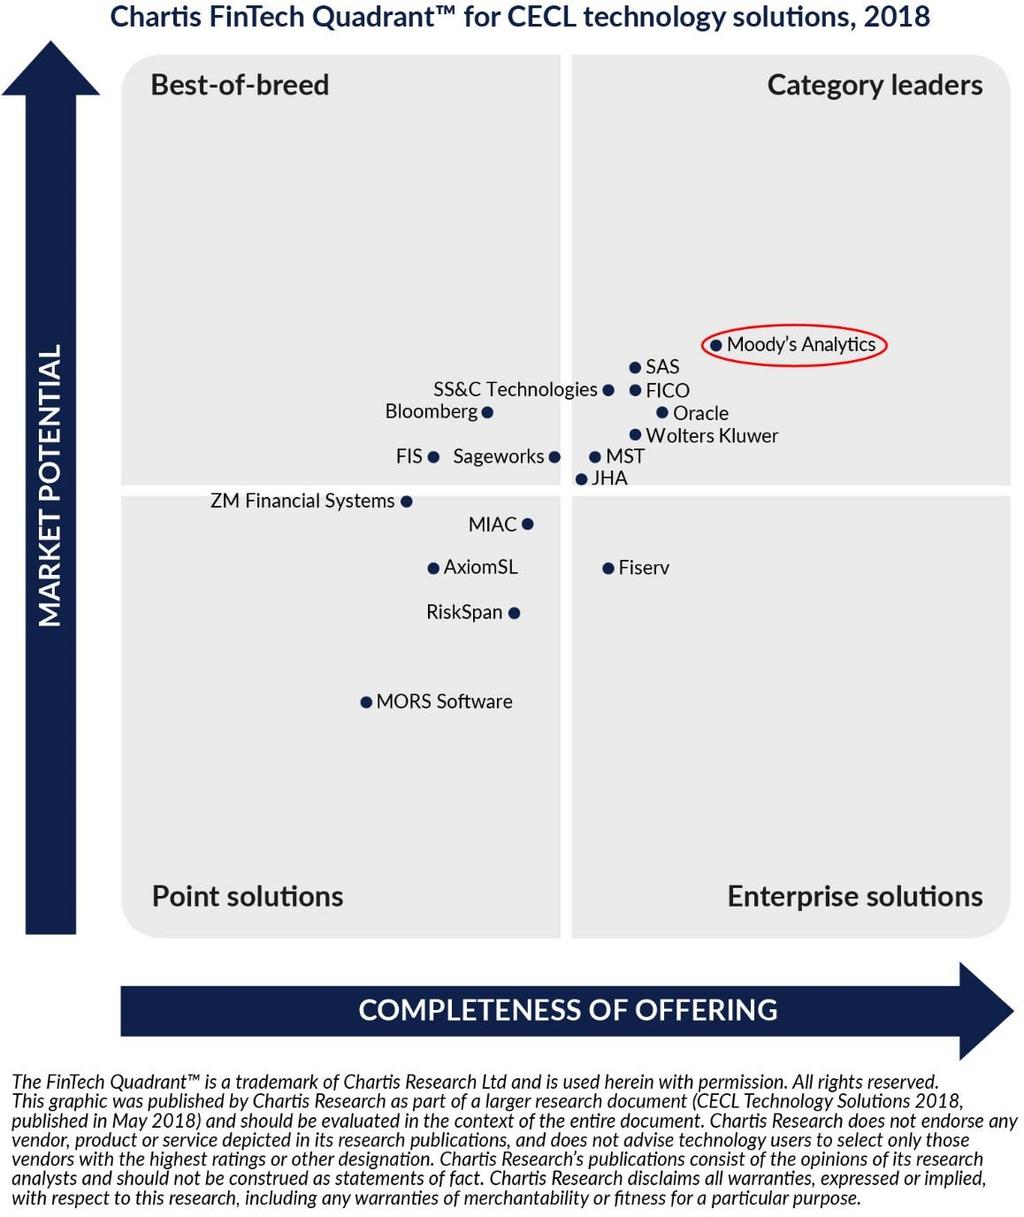 Moody s Analytics takes top ranking for CECL Technology Solution» Advisory» Data»